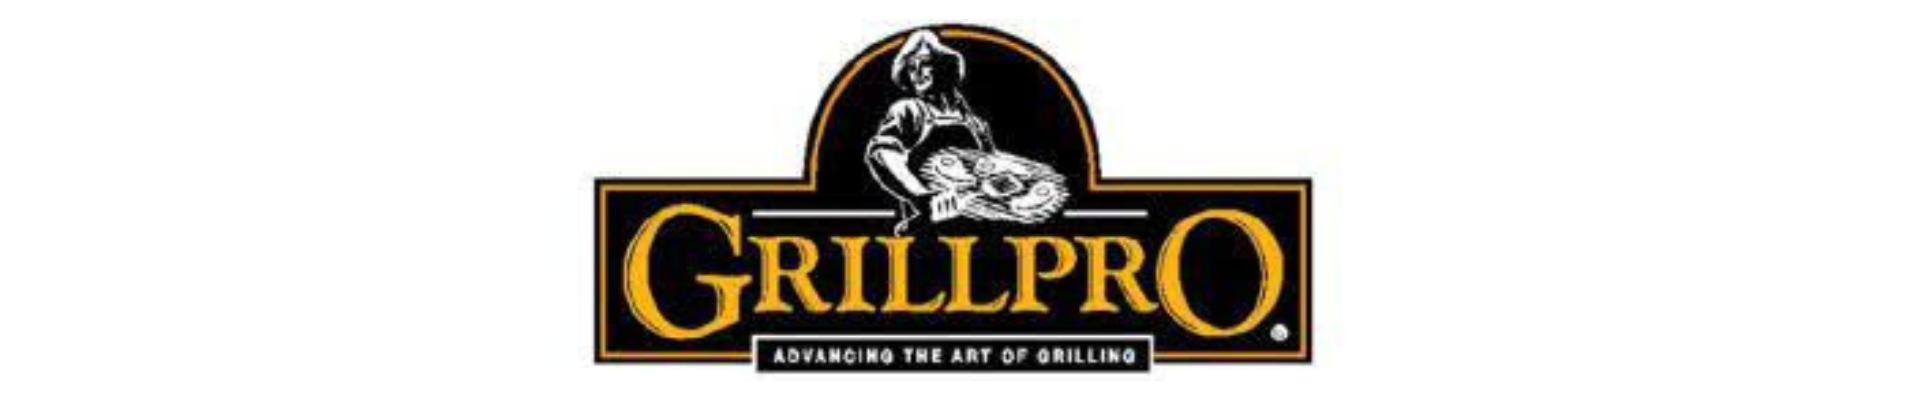 Grillpro